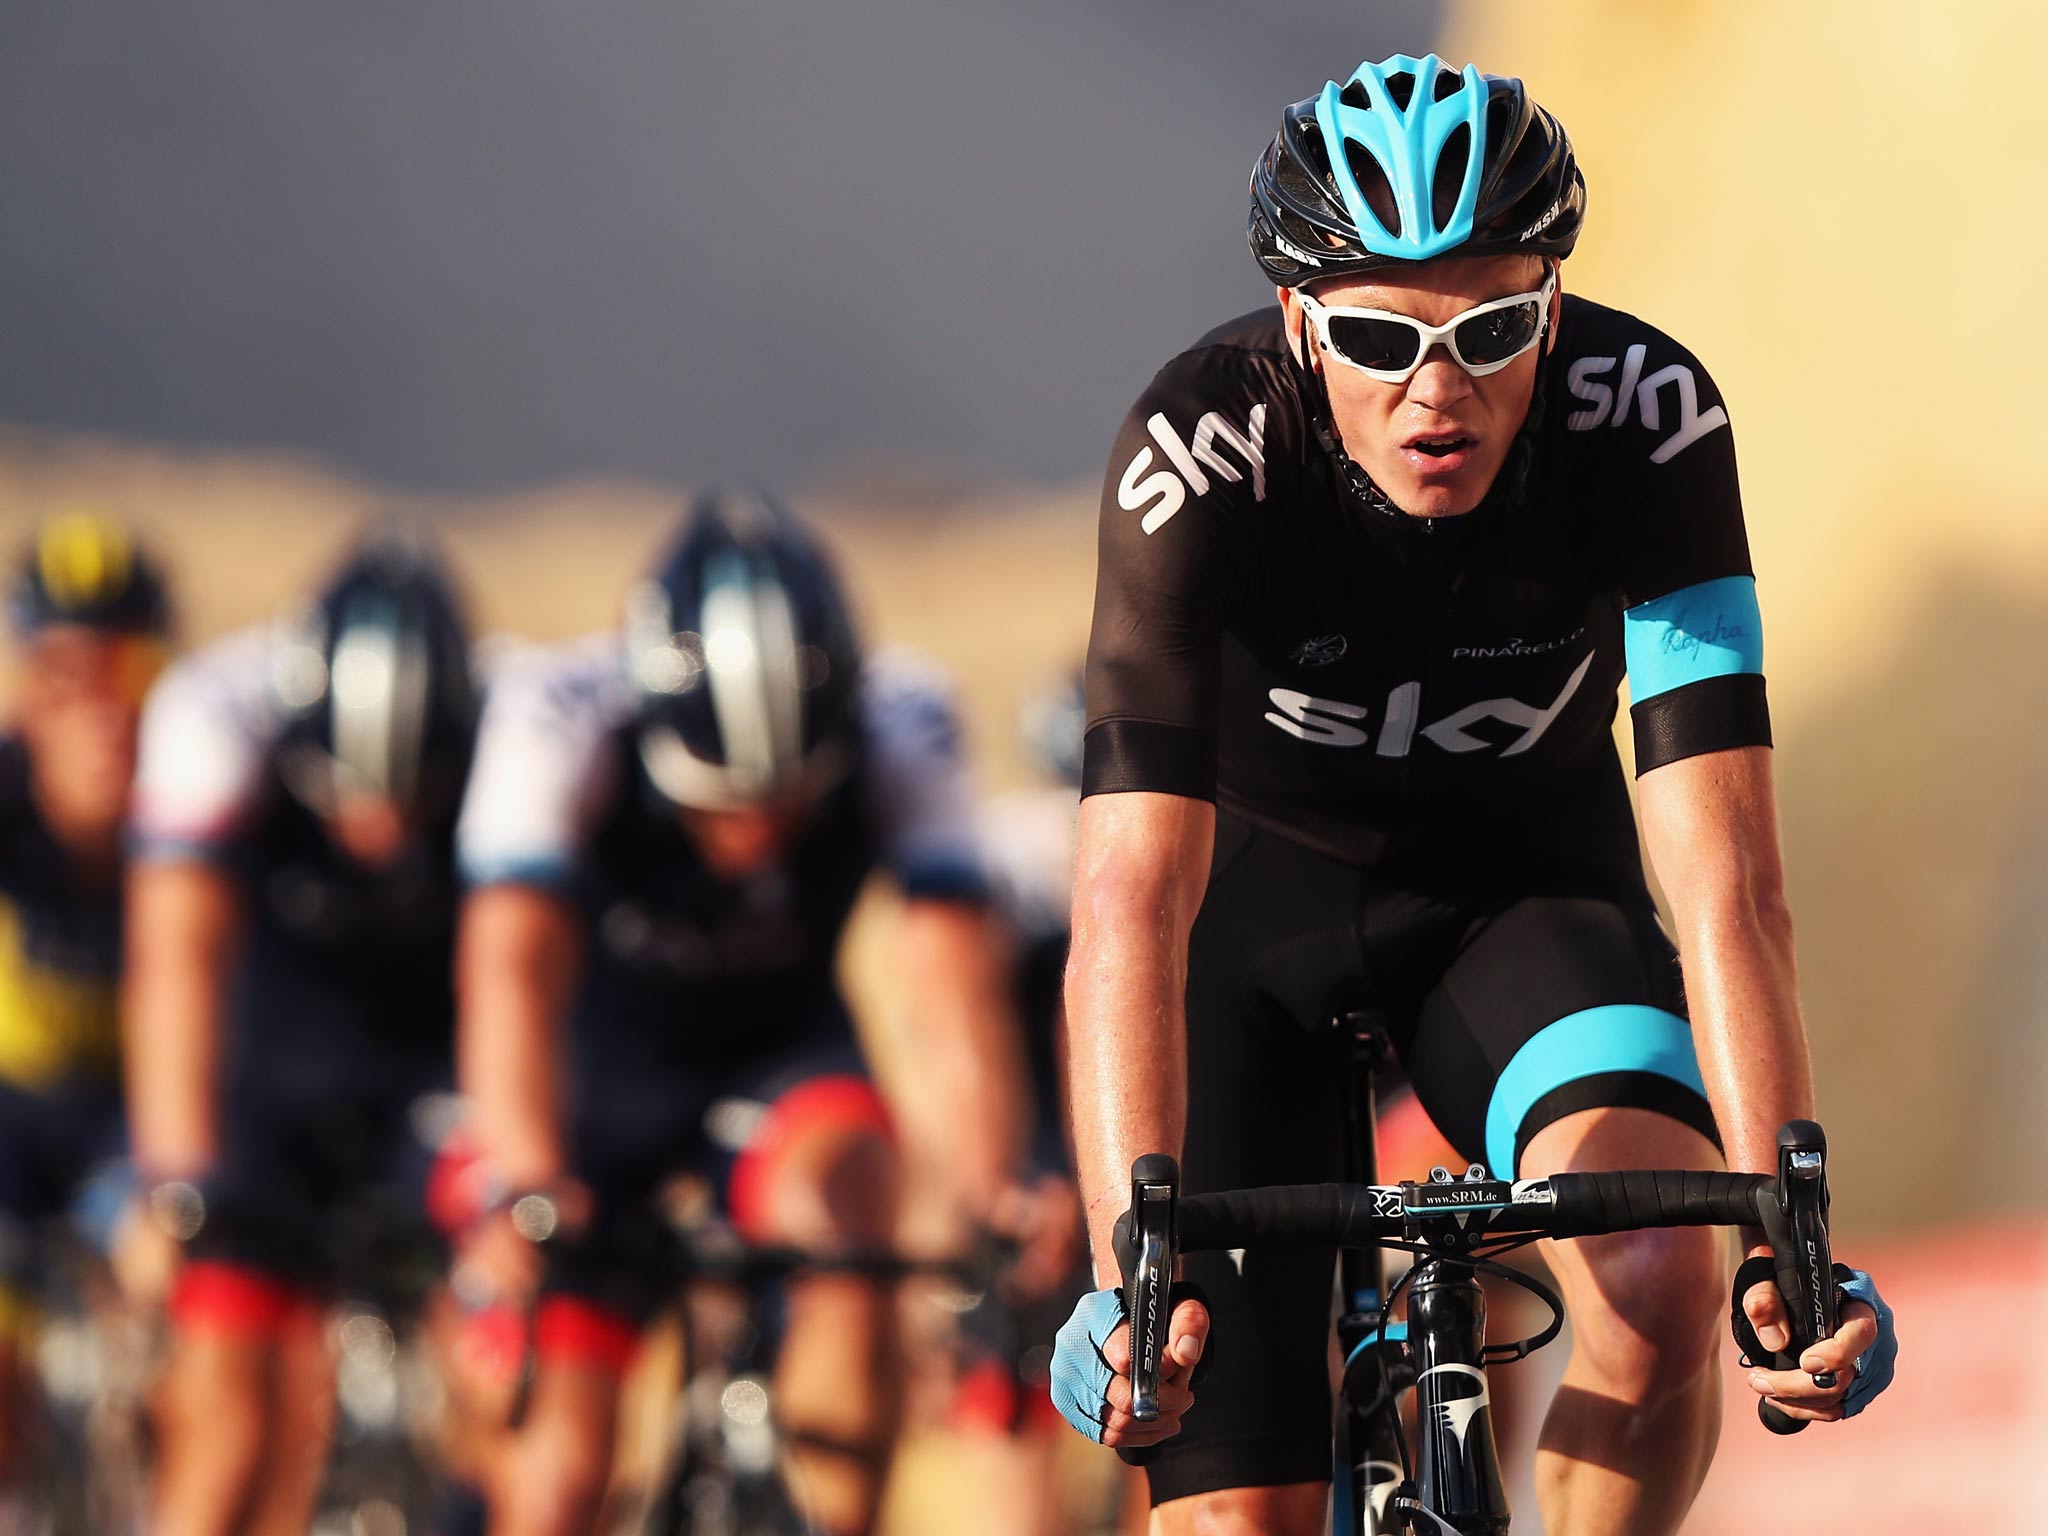 Team Sky rider Chris Froome pictured on the Tour of Oman - he finished 13th on the third stage